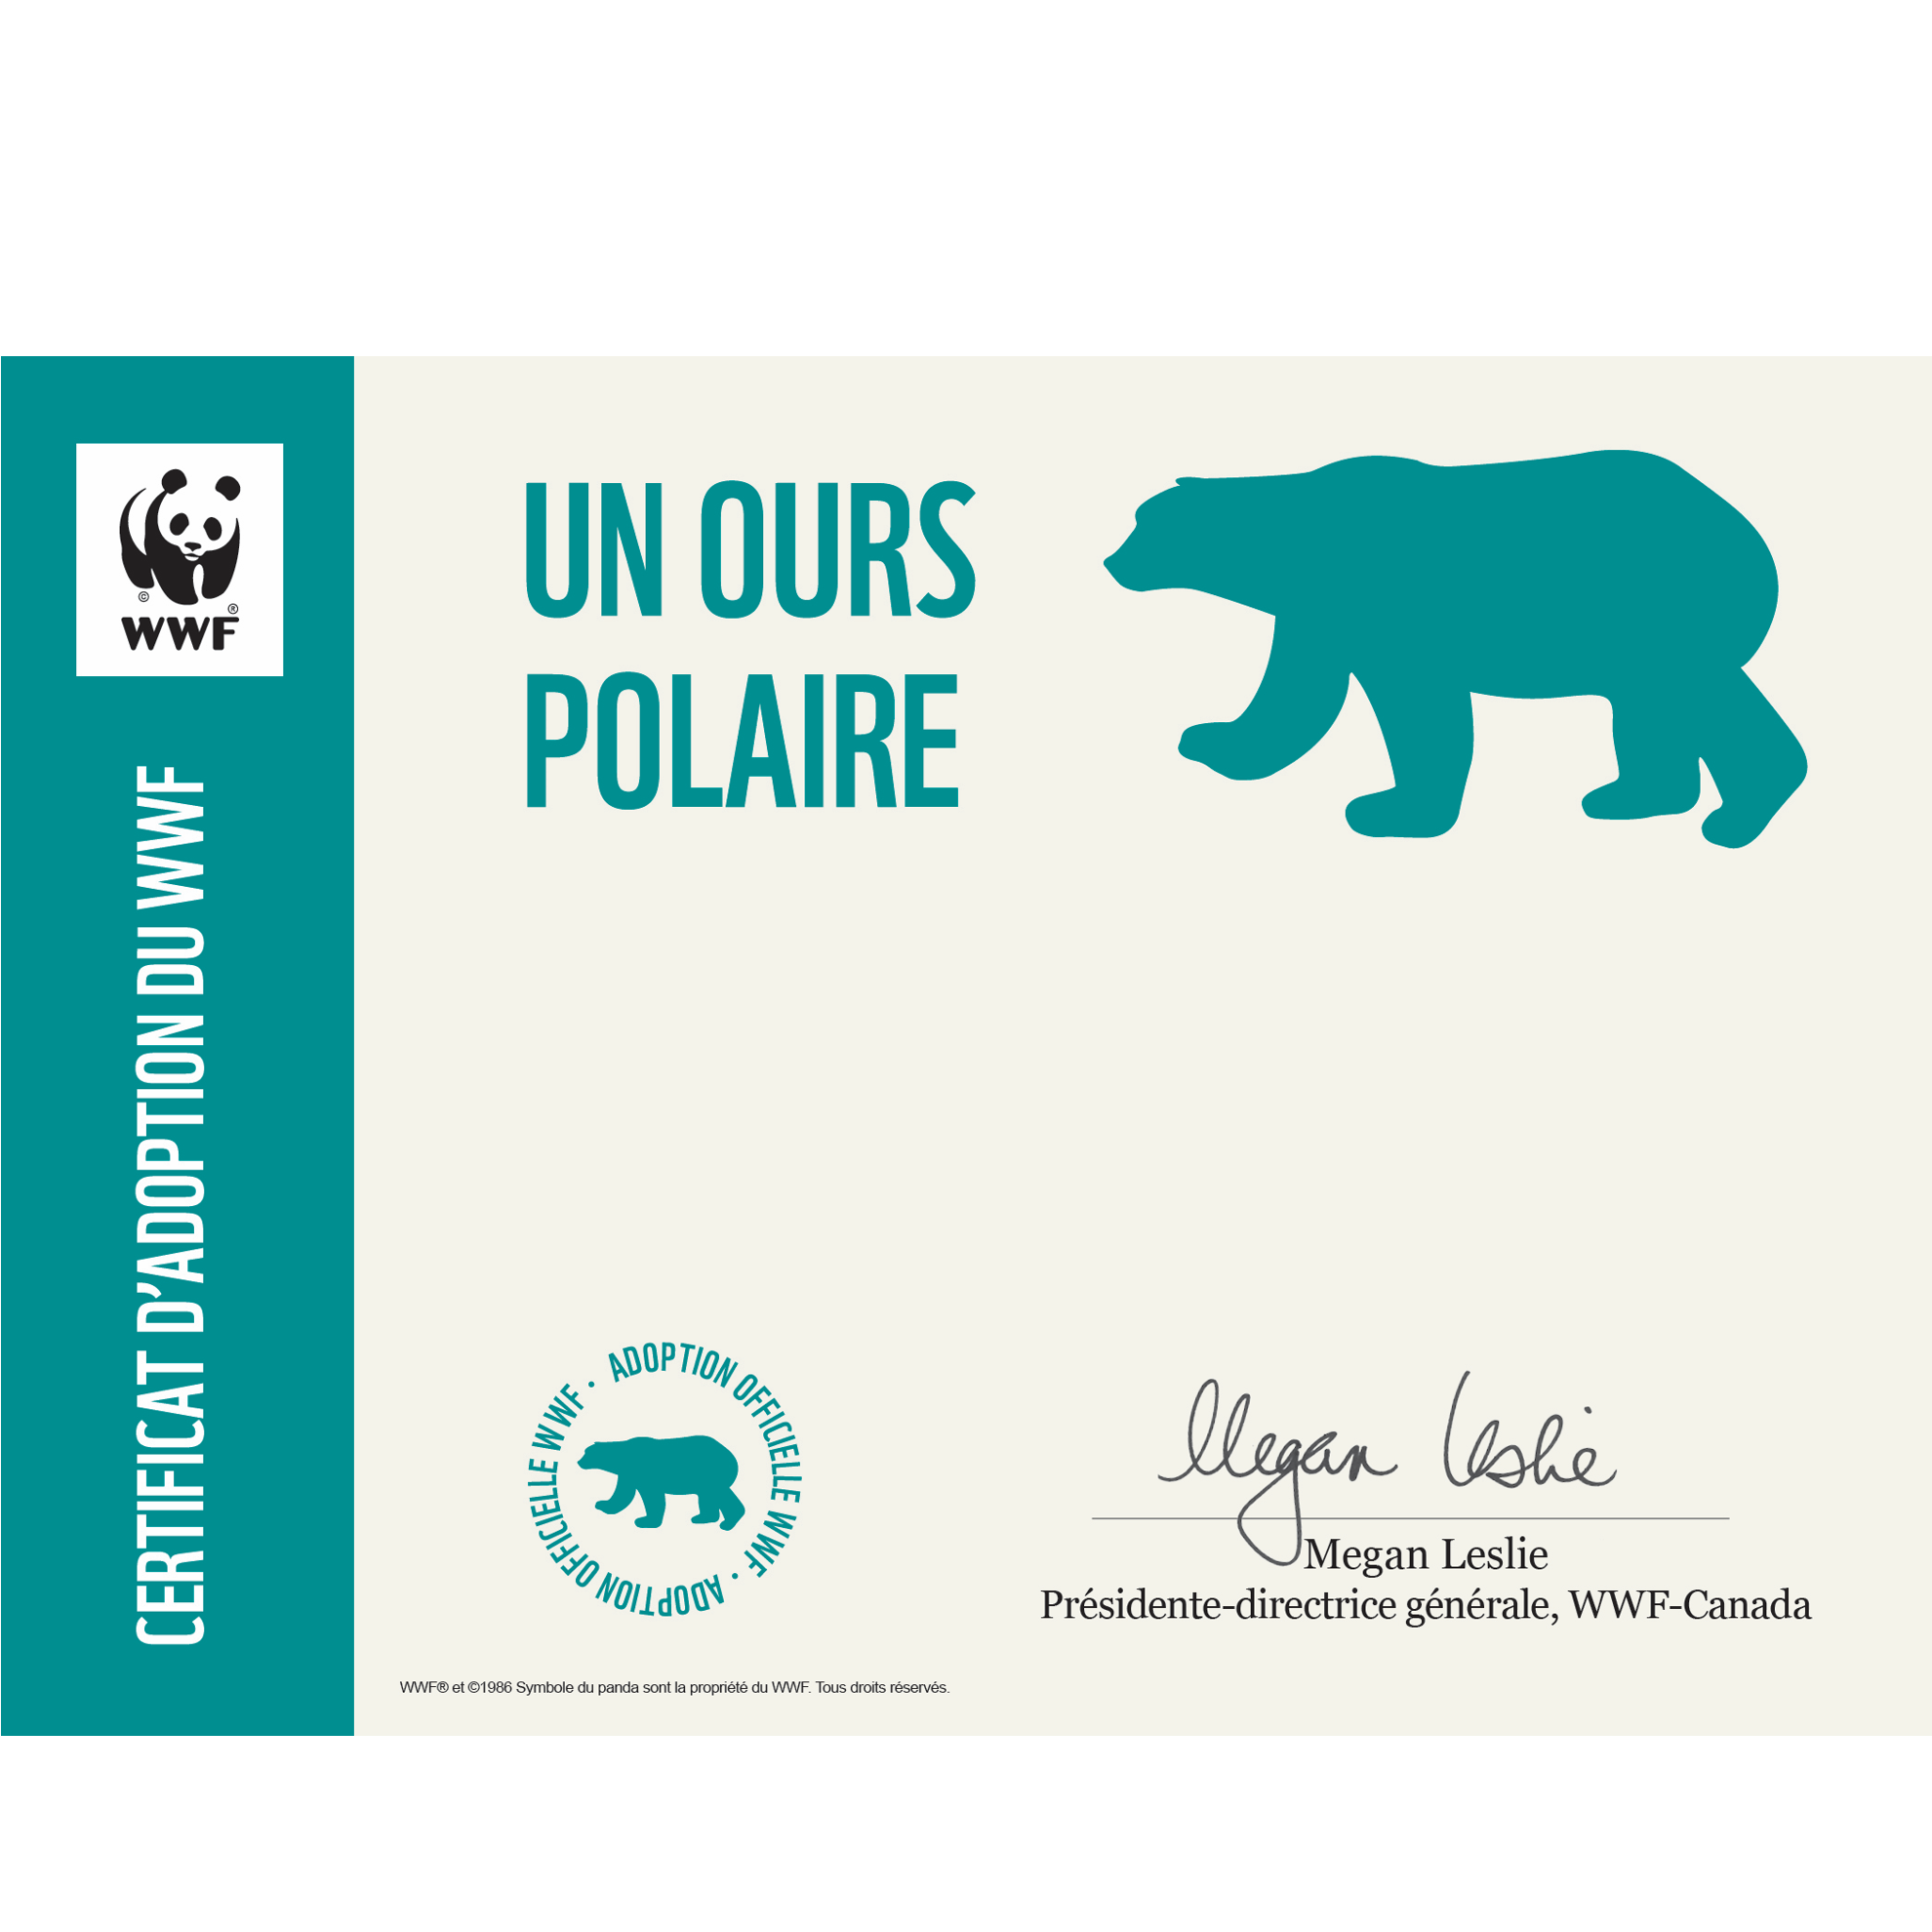 Ours polaire - WWF-Canada